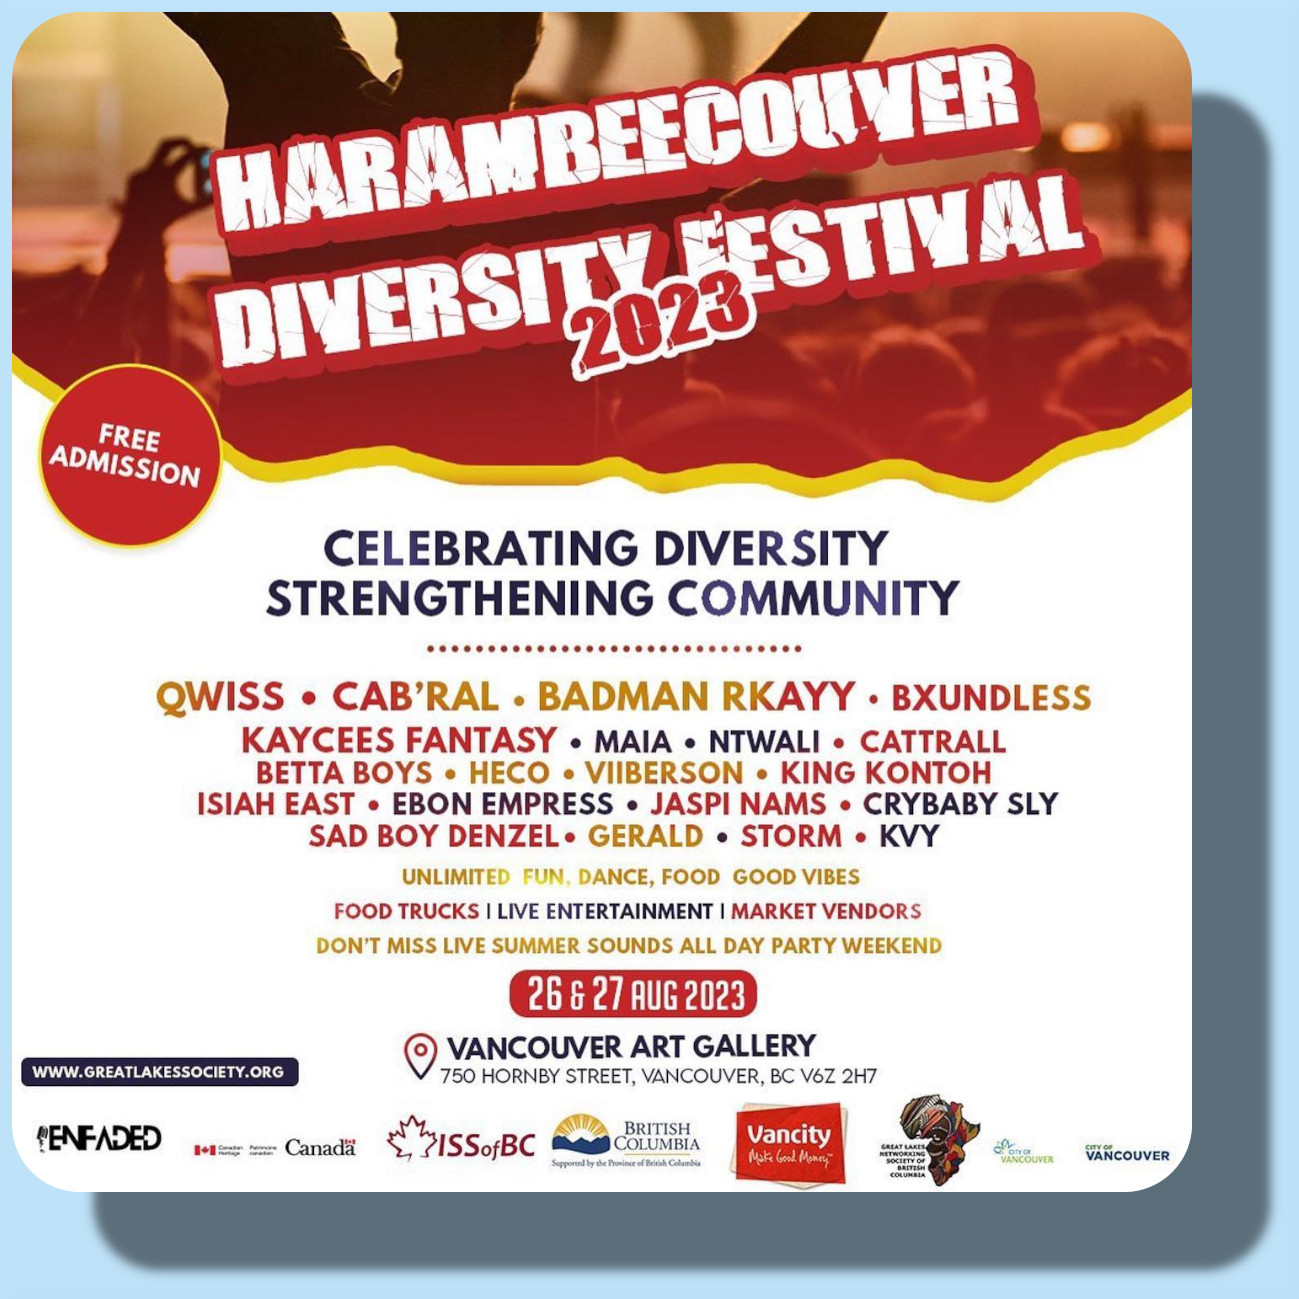 Harambeecouver Diversity Festival 2023 | Vancouver | August 26-27